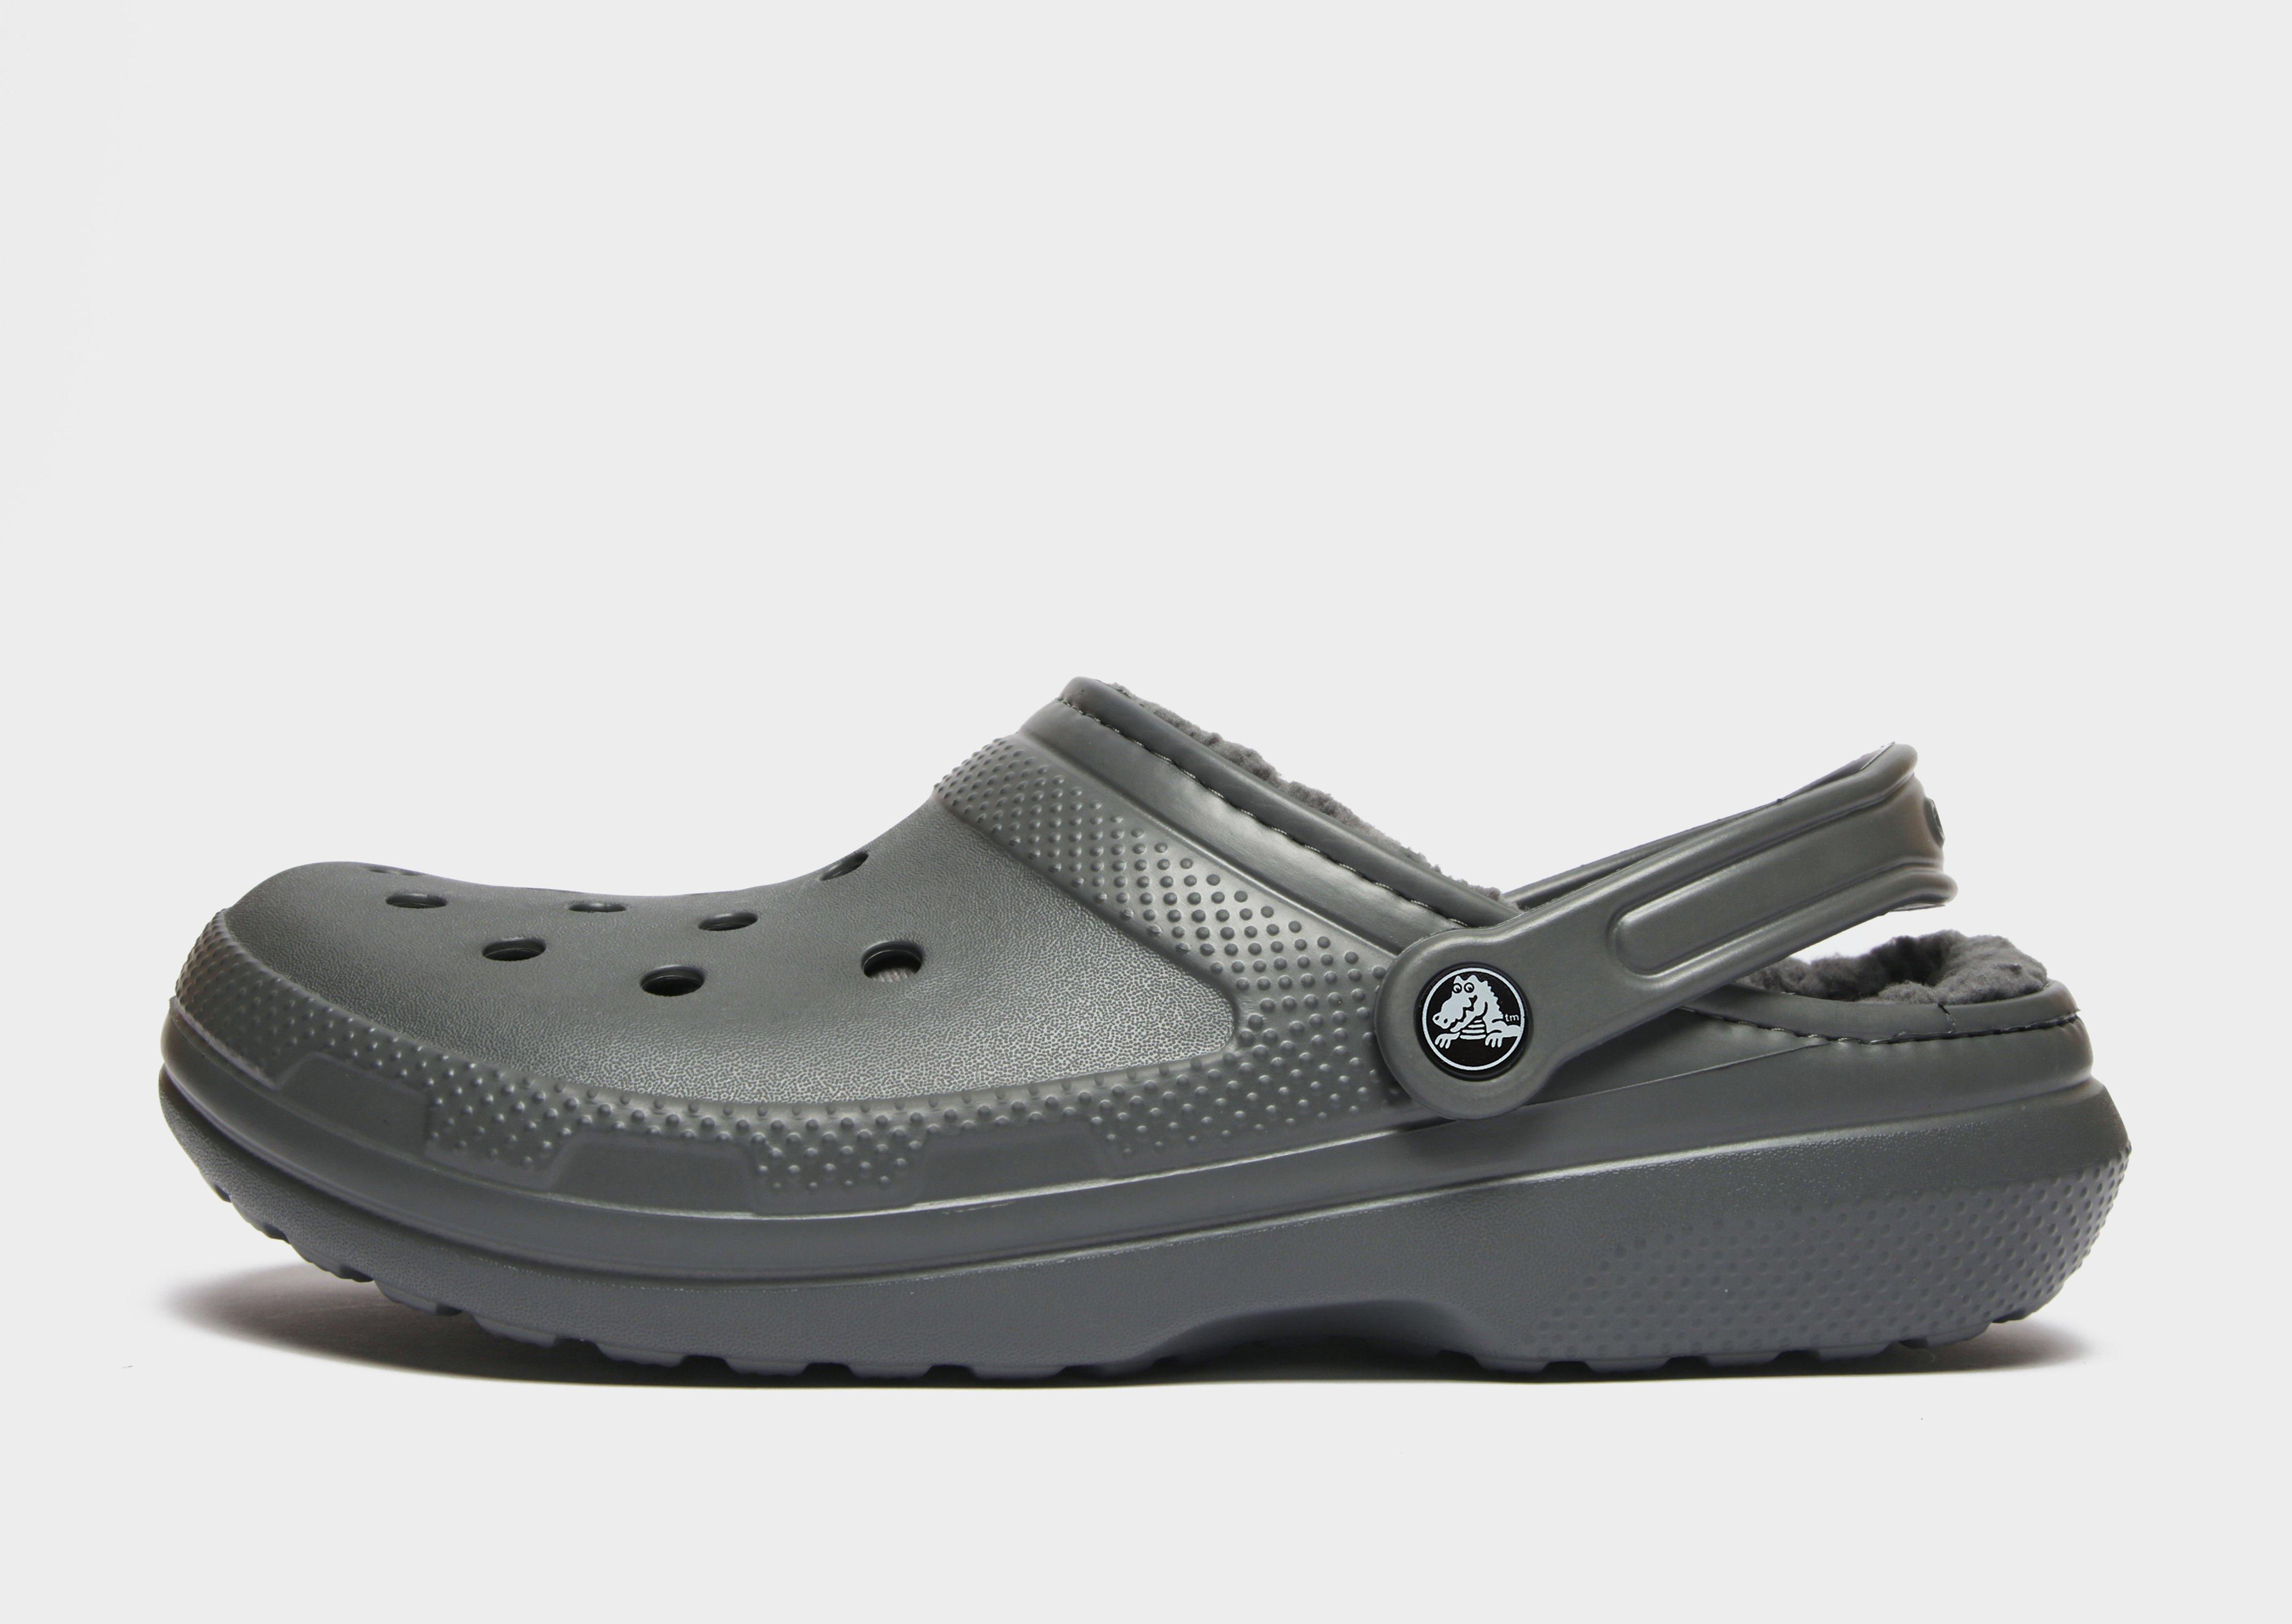 Crocs™ Faux Fur Lined Winter Clog In Gray For Men Lyst, 58% OFF